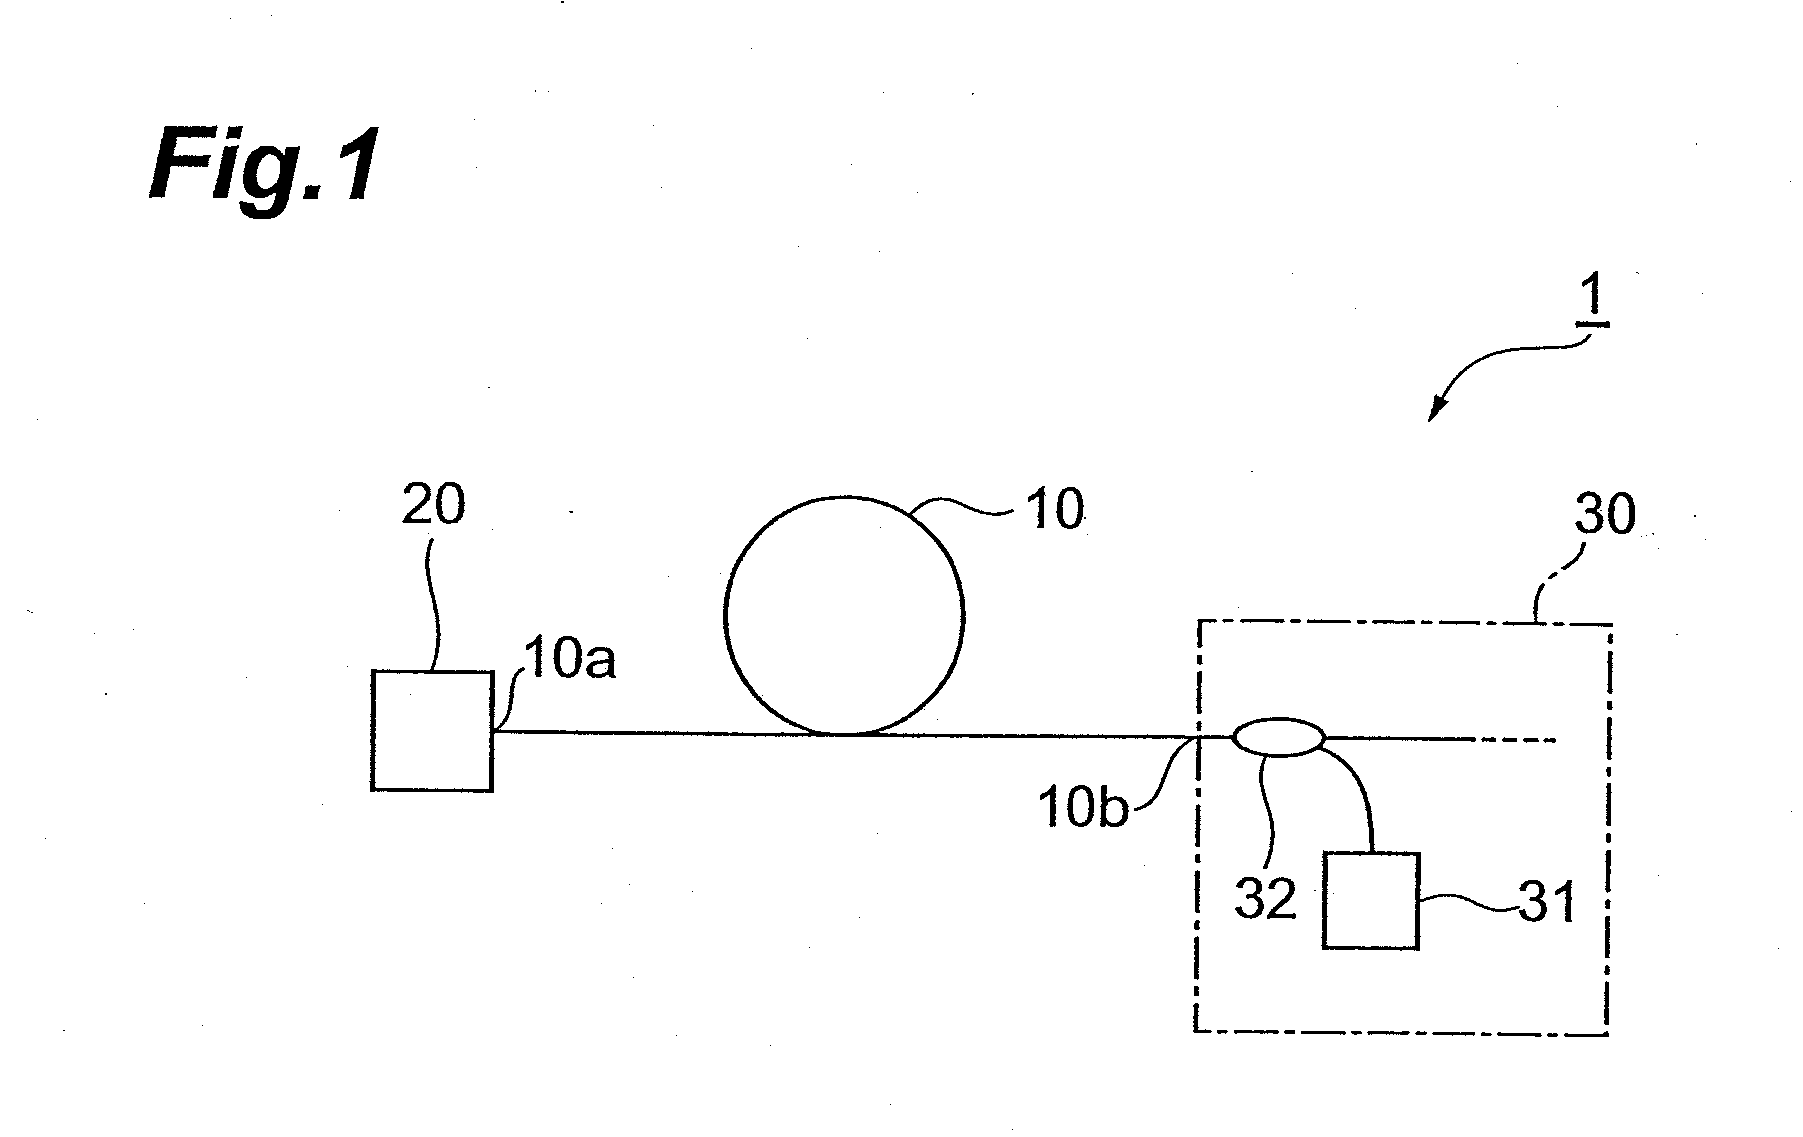 Optical communications system